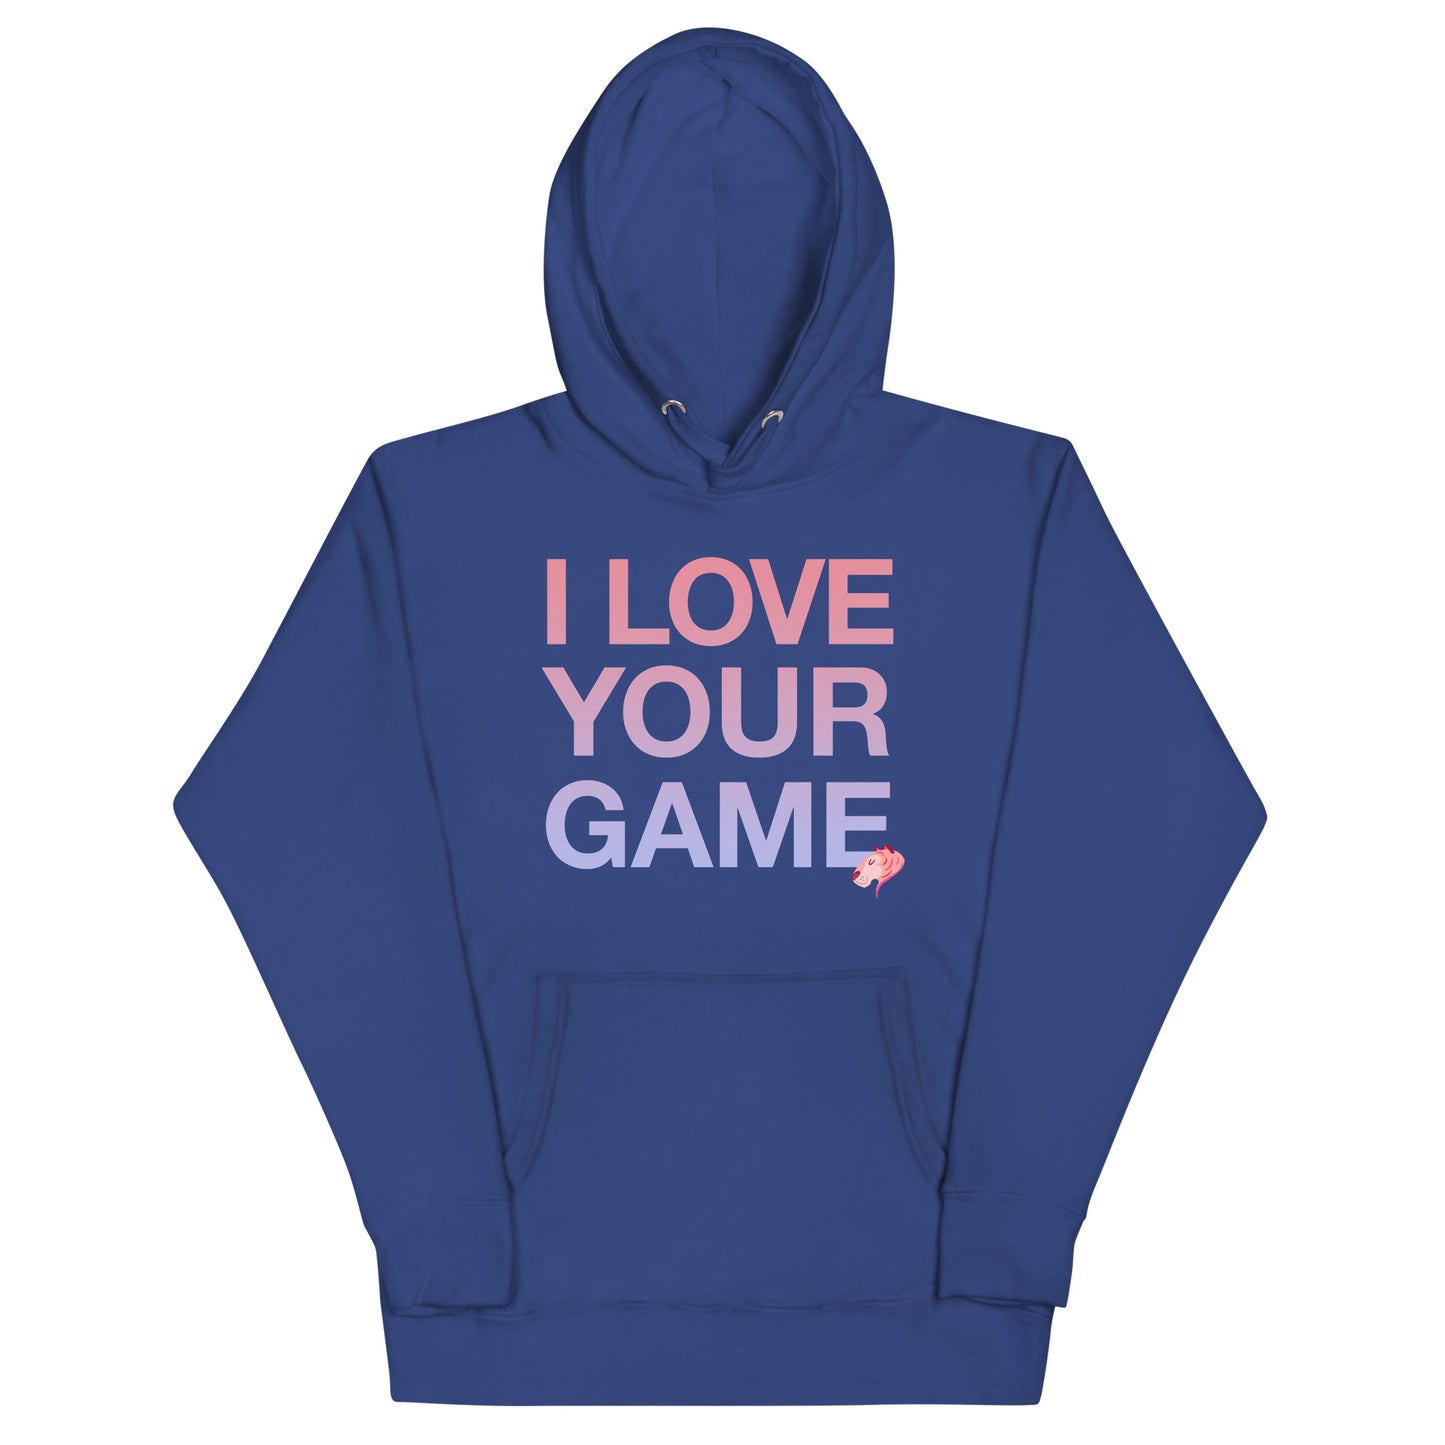 I LOVE YOUR GAME Unisex Hoodie